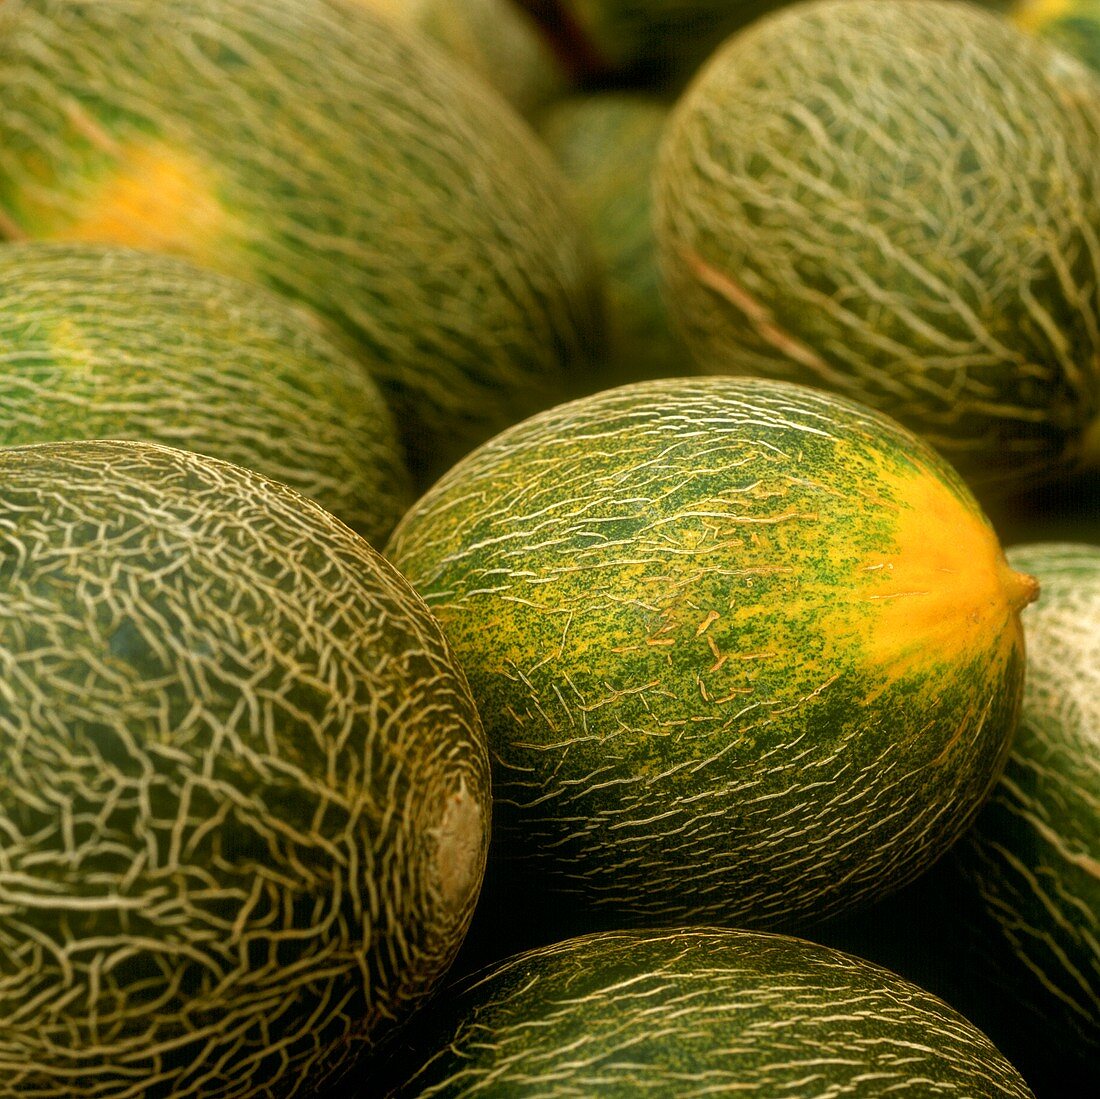 Netted melon